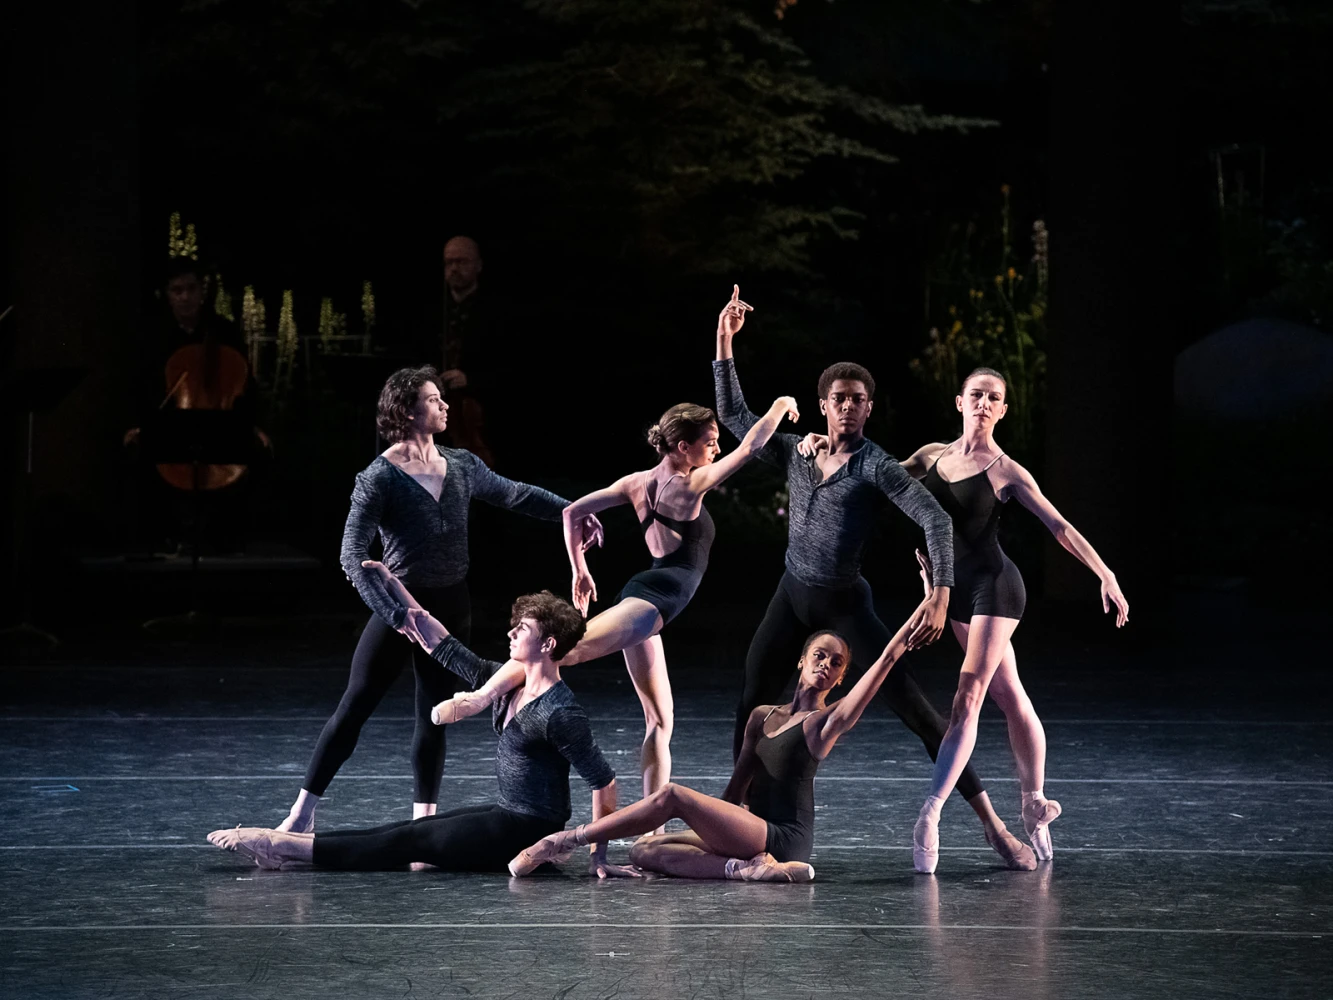 Artists at the Center | Tiler Peck: What to expect - 3